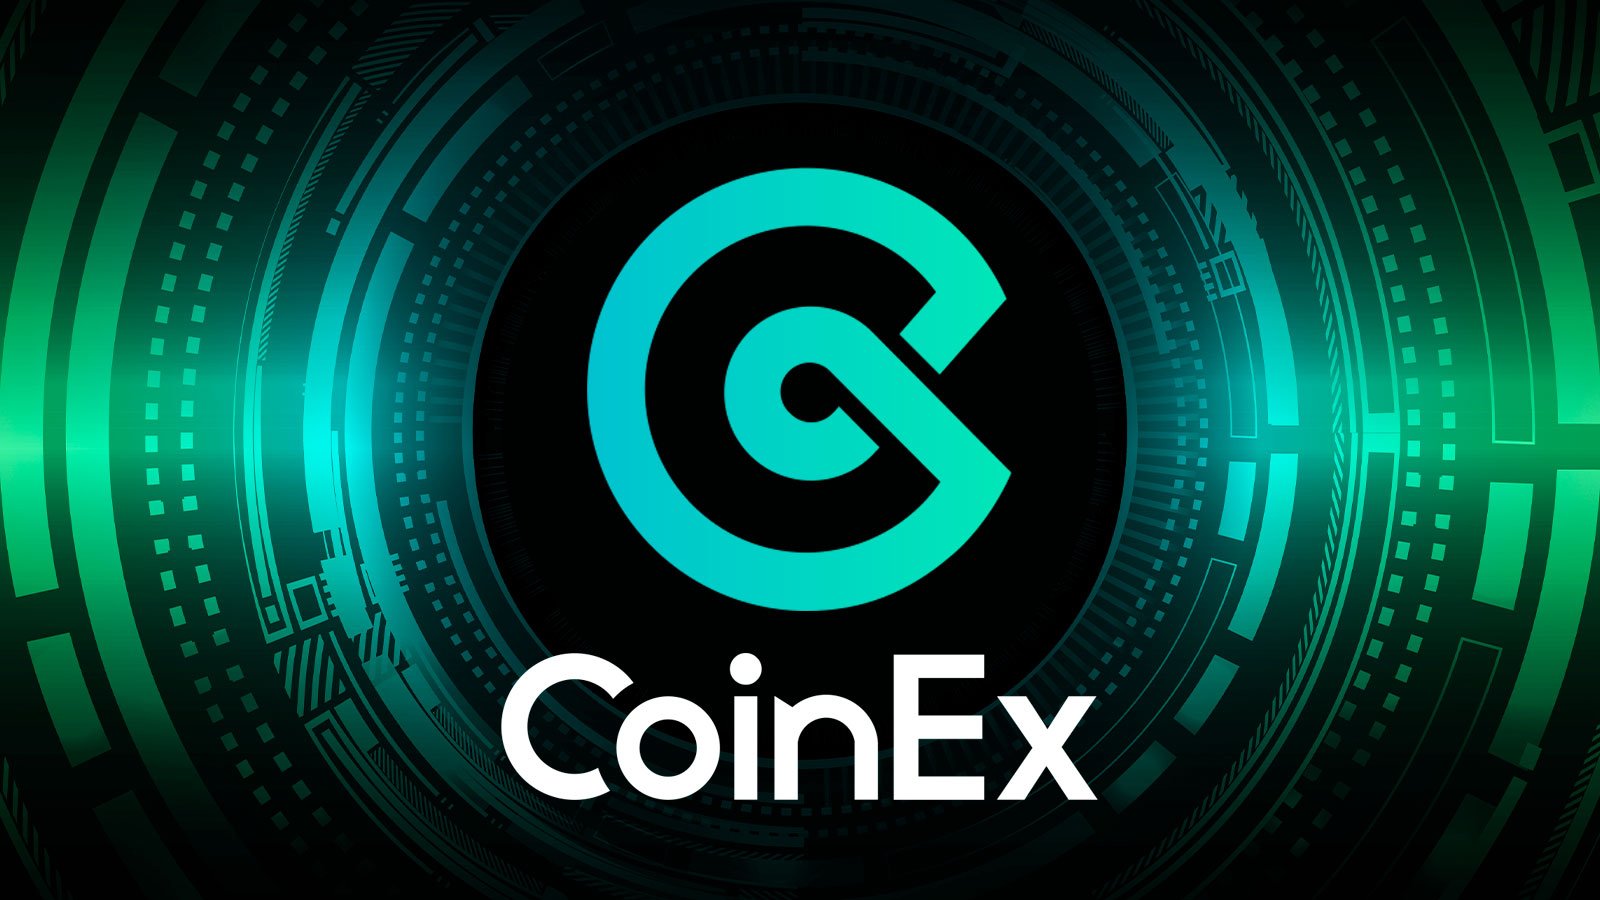 How Can Decun Change Ethereum’s L2: CoinEx Research Position